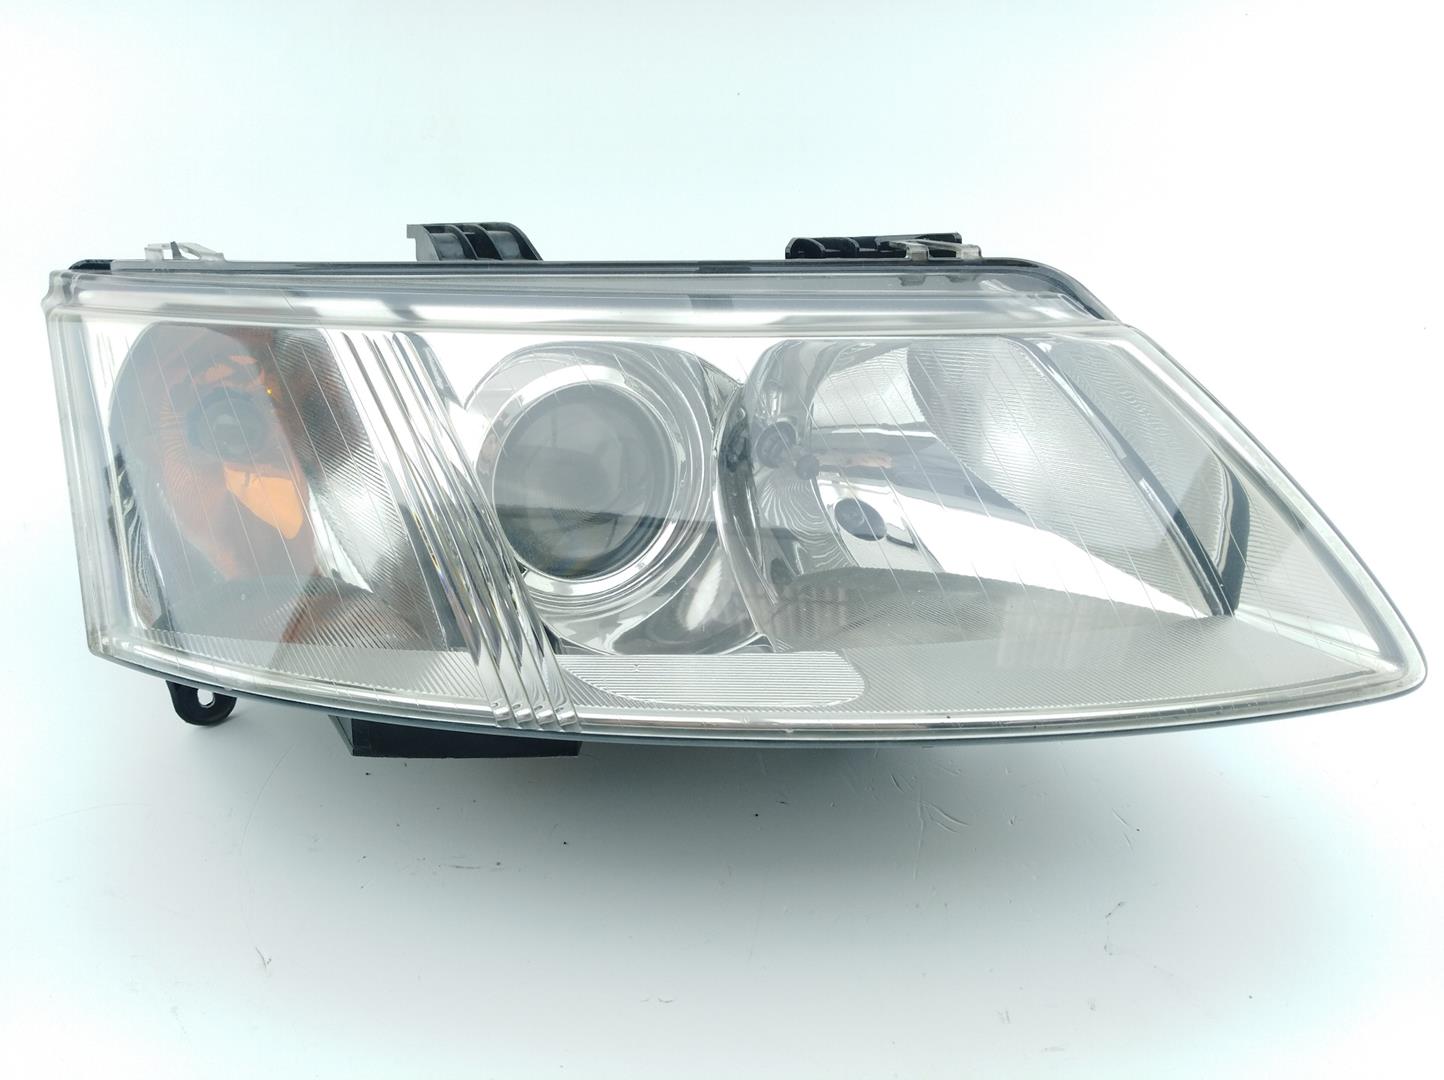 SAAB 93 1 generation (1956-1960) Front Right Headlight 15581800RE, 15581800RE, 15581800RE 24665933